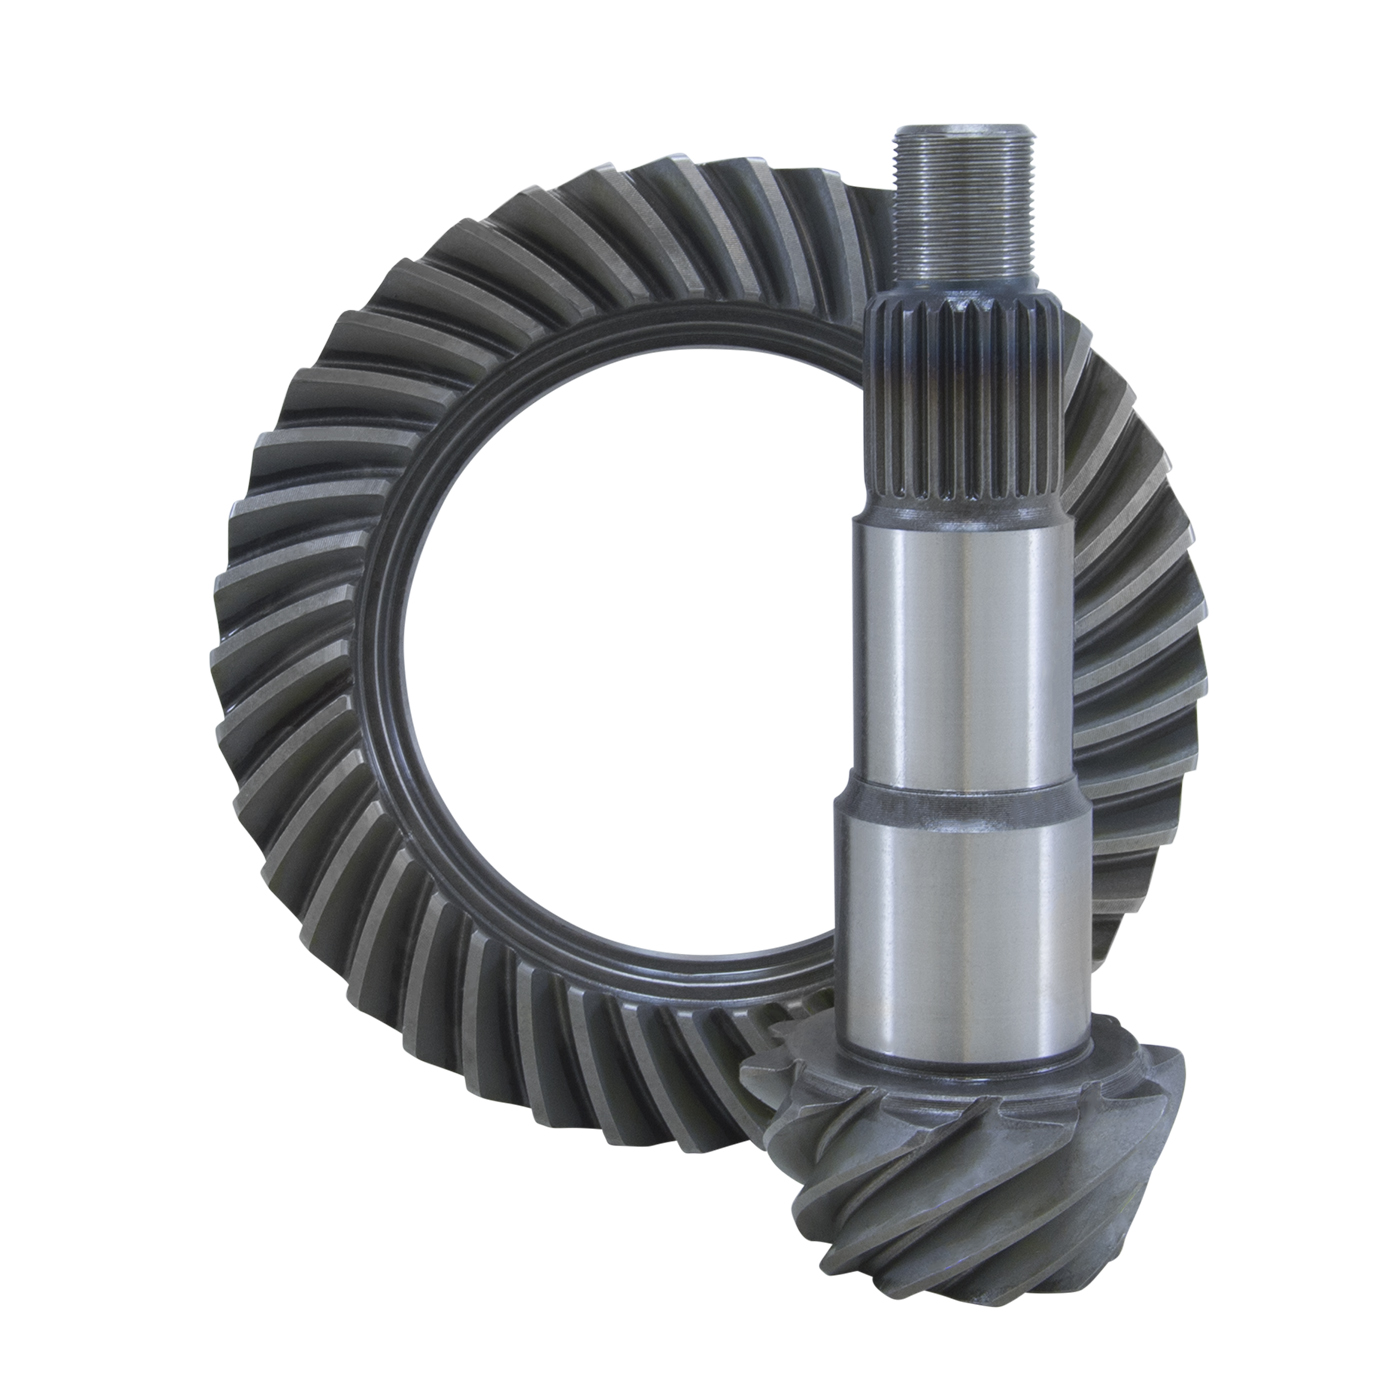 USA Standard Ring & Pinion set for Dana 30 JK reverse rotation in a 5.13 ratio